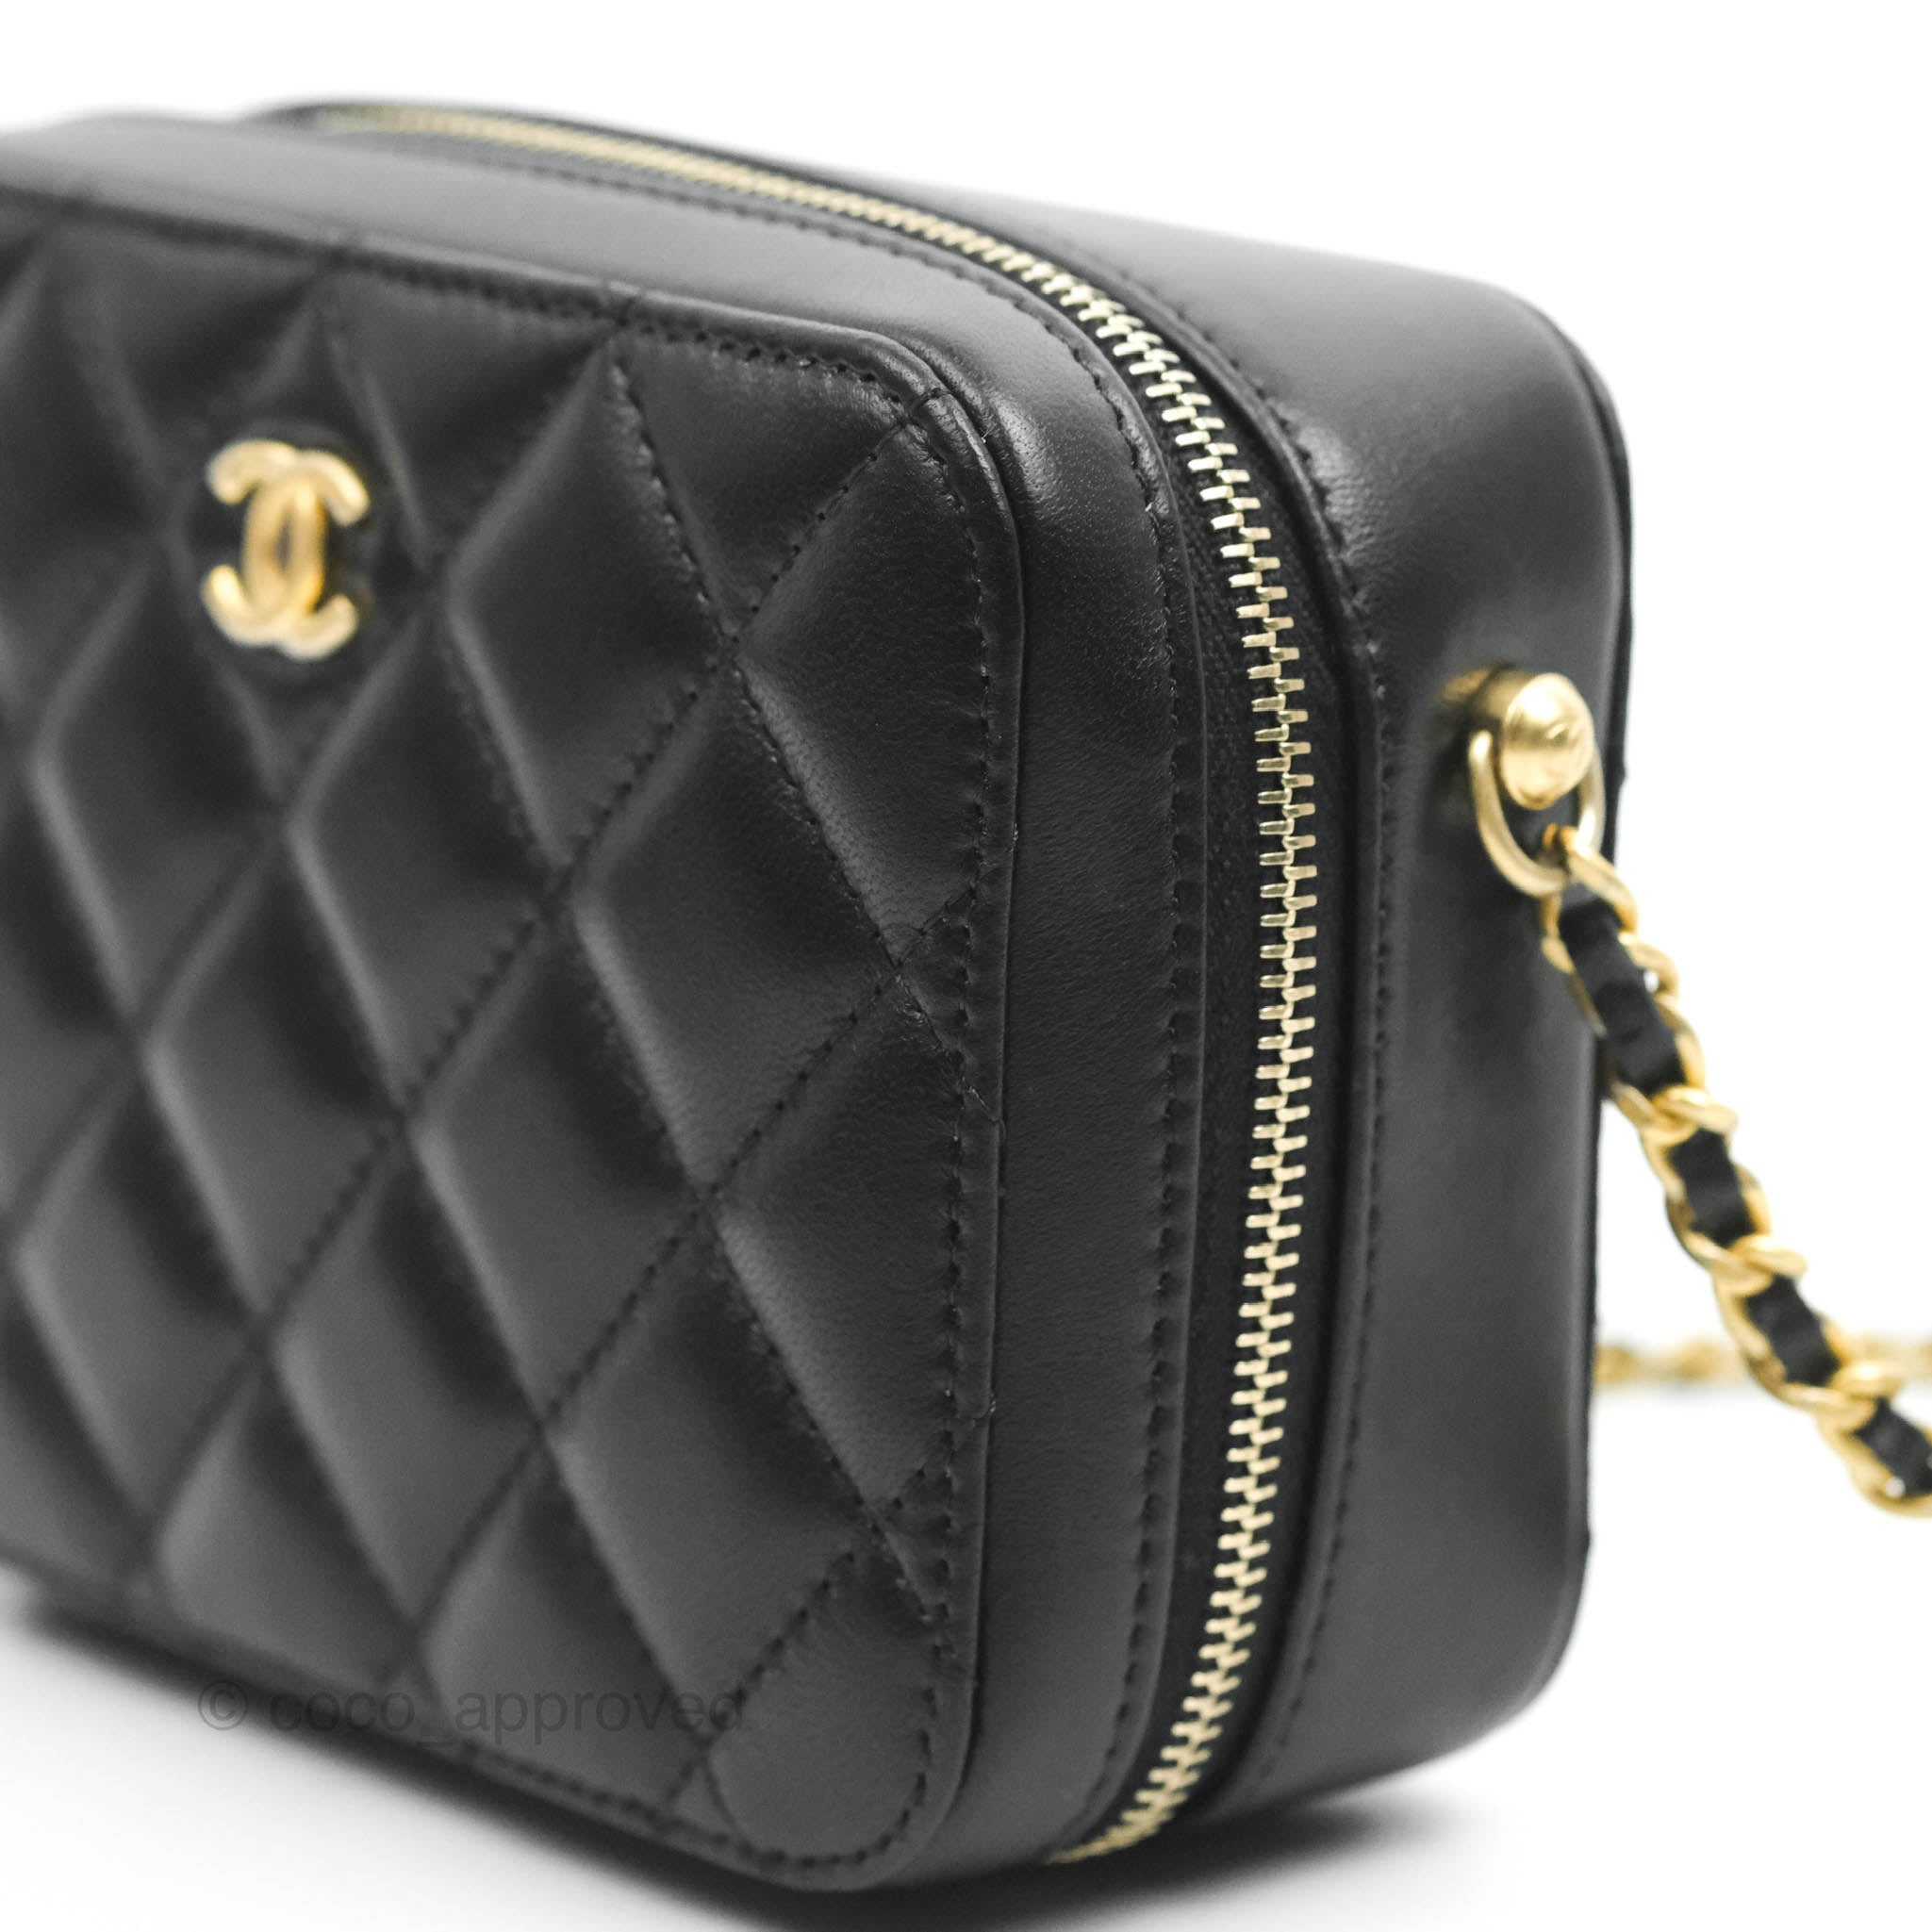 Chanel Mini Flap Bag With Pearl And Woven Chain CC Logo Black Lambskin – Coco  Approved Studio